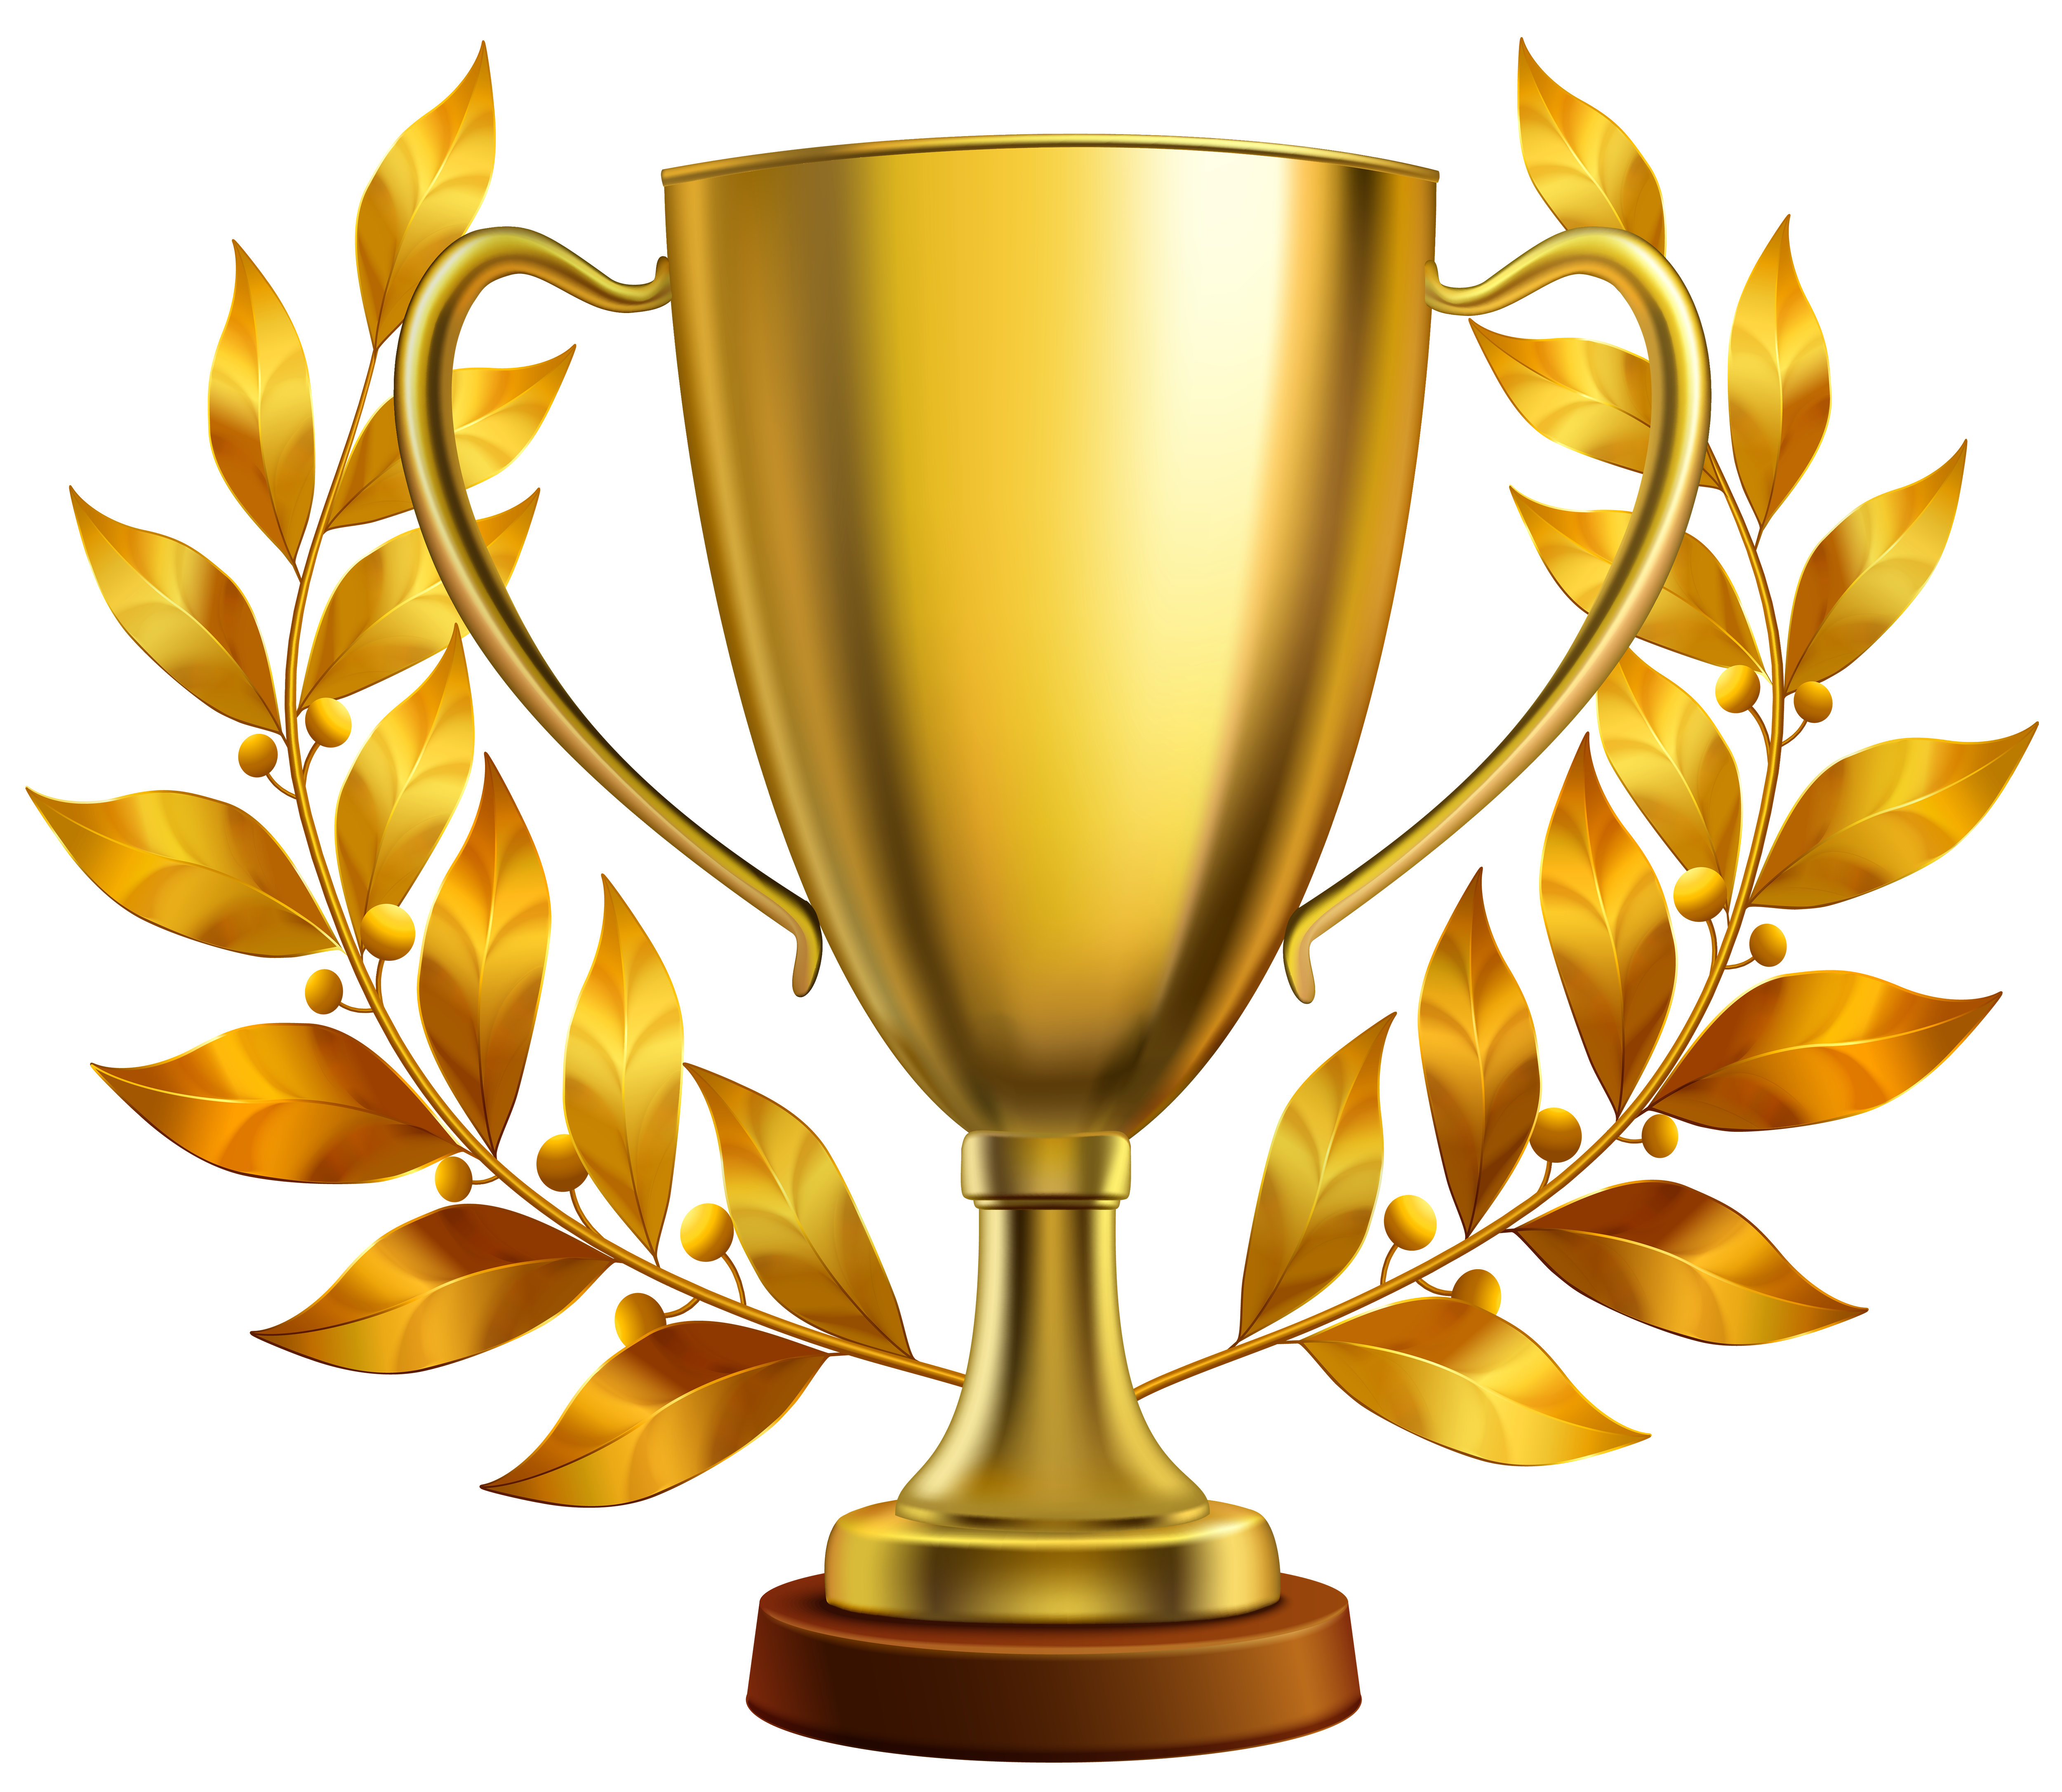 Learning clipart award. Gold cup with laurel